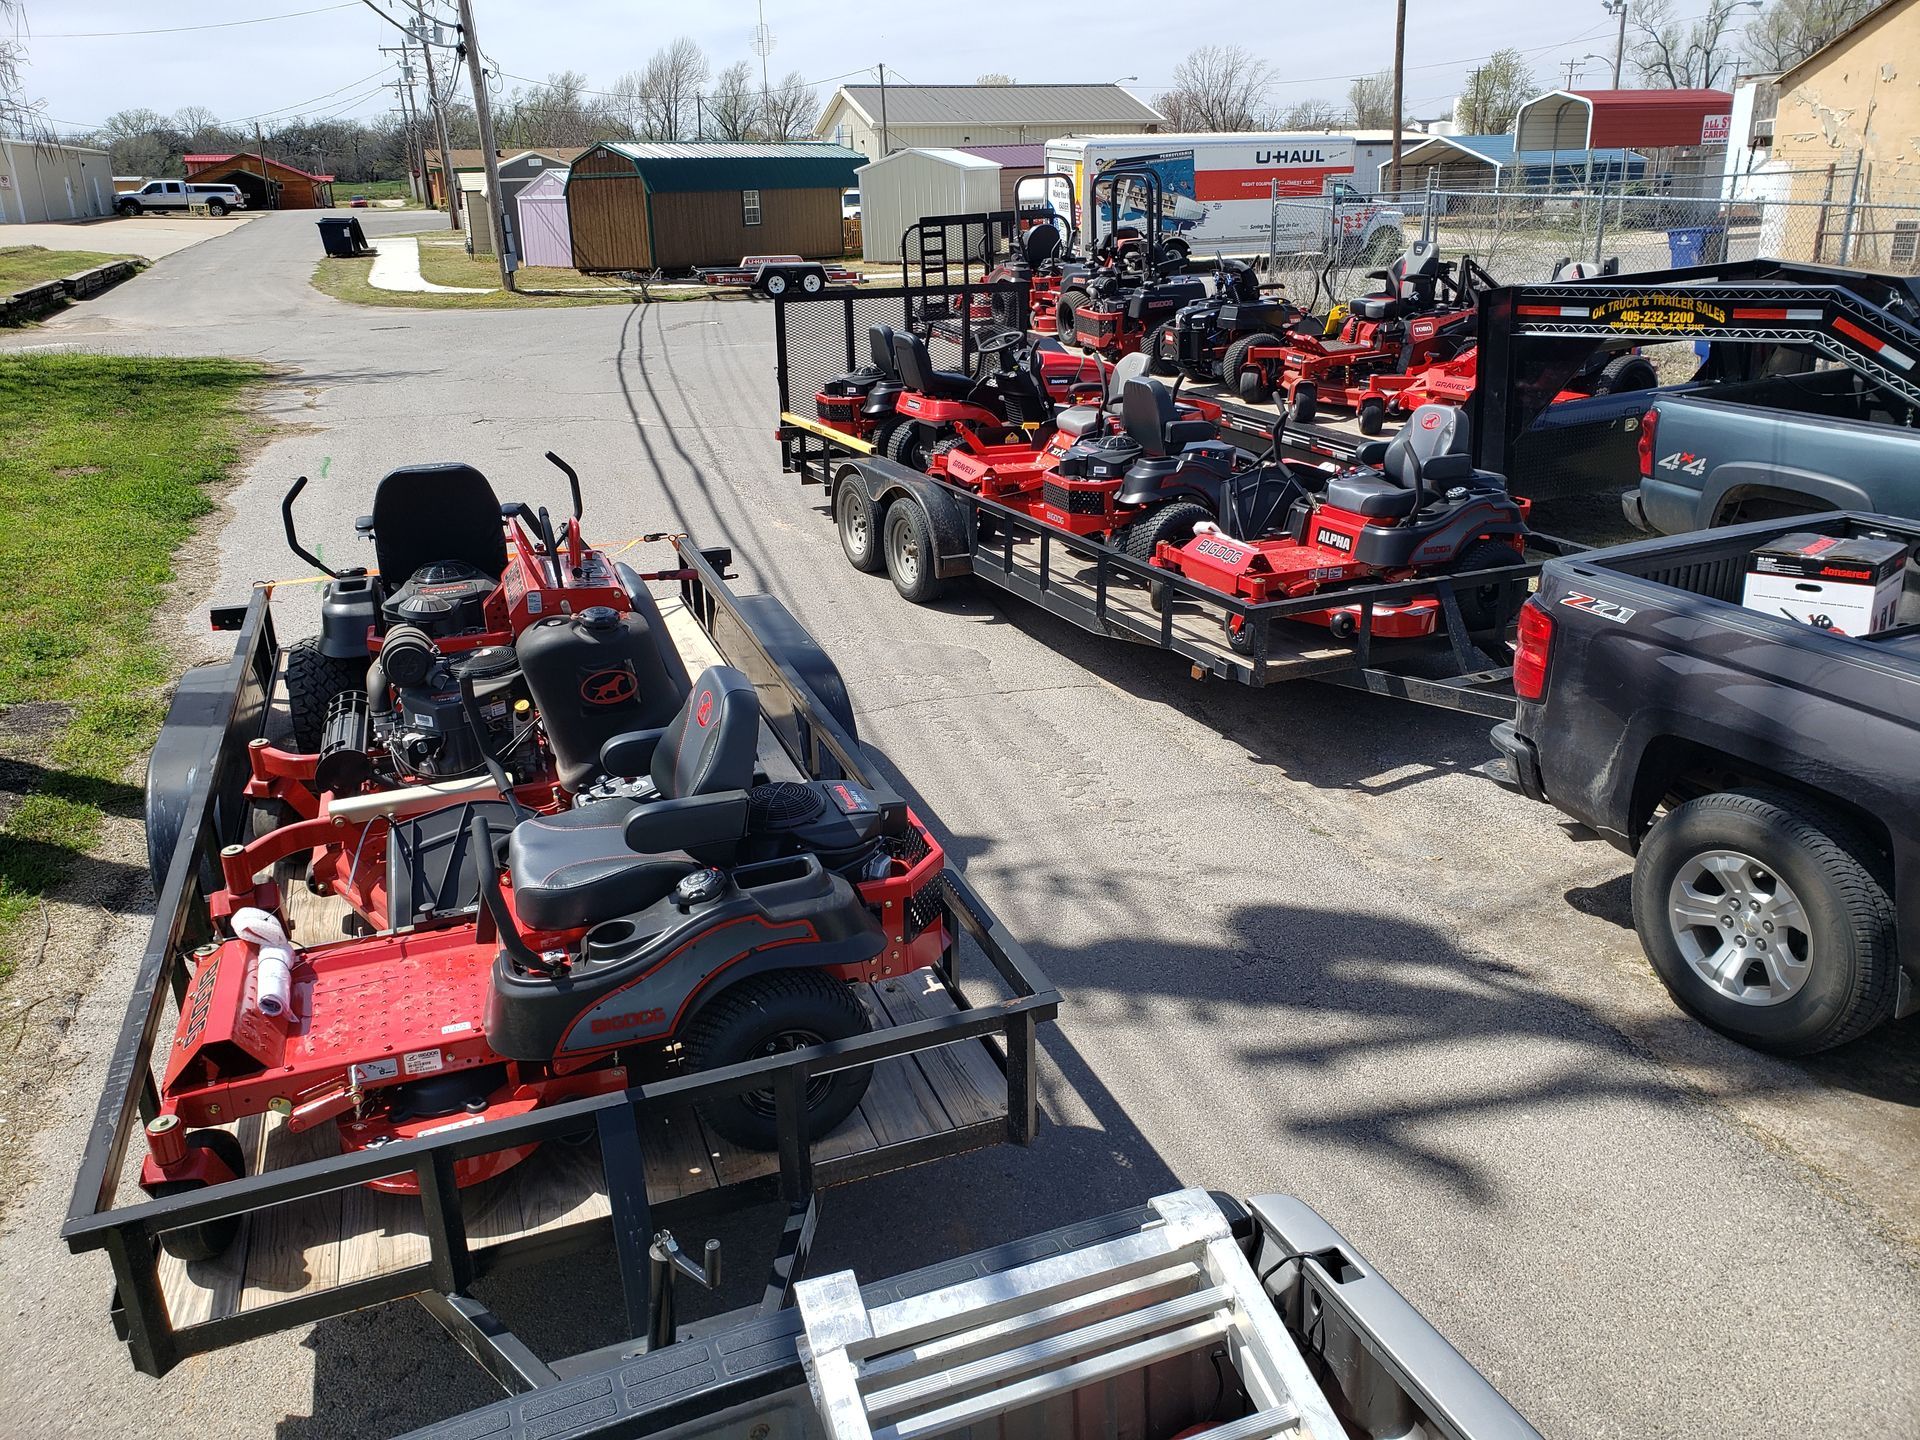 several lawn mower trailers are parked in front of a u-haul truck